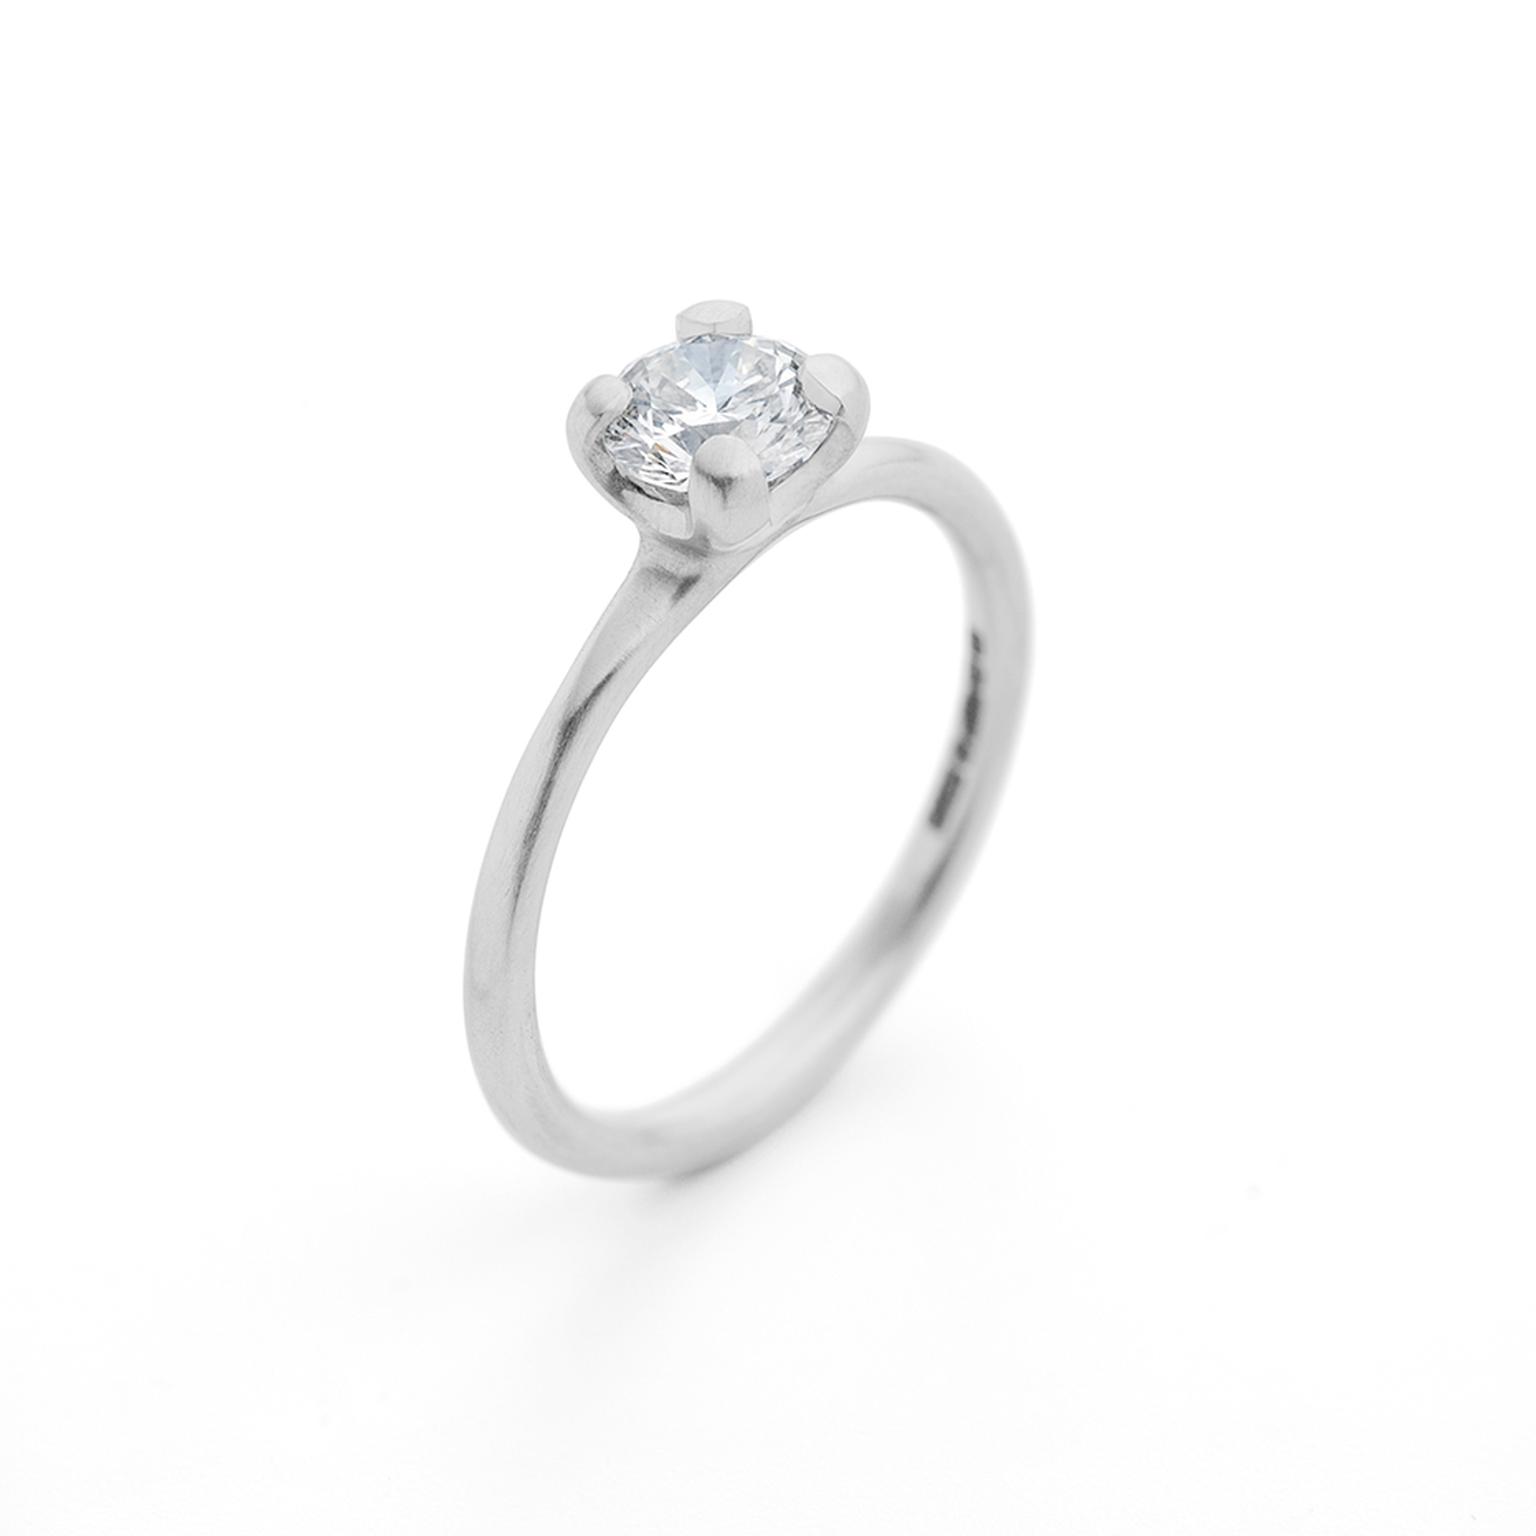 McCaul four claw platinum and diamond engagement ring with a centre brilliant-cut diamond.